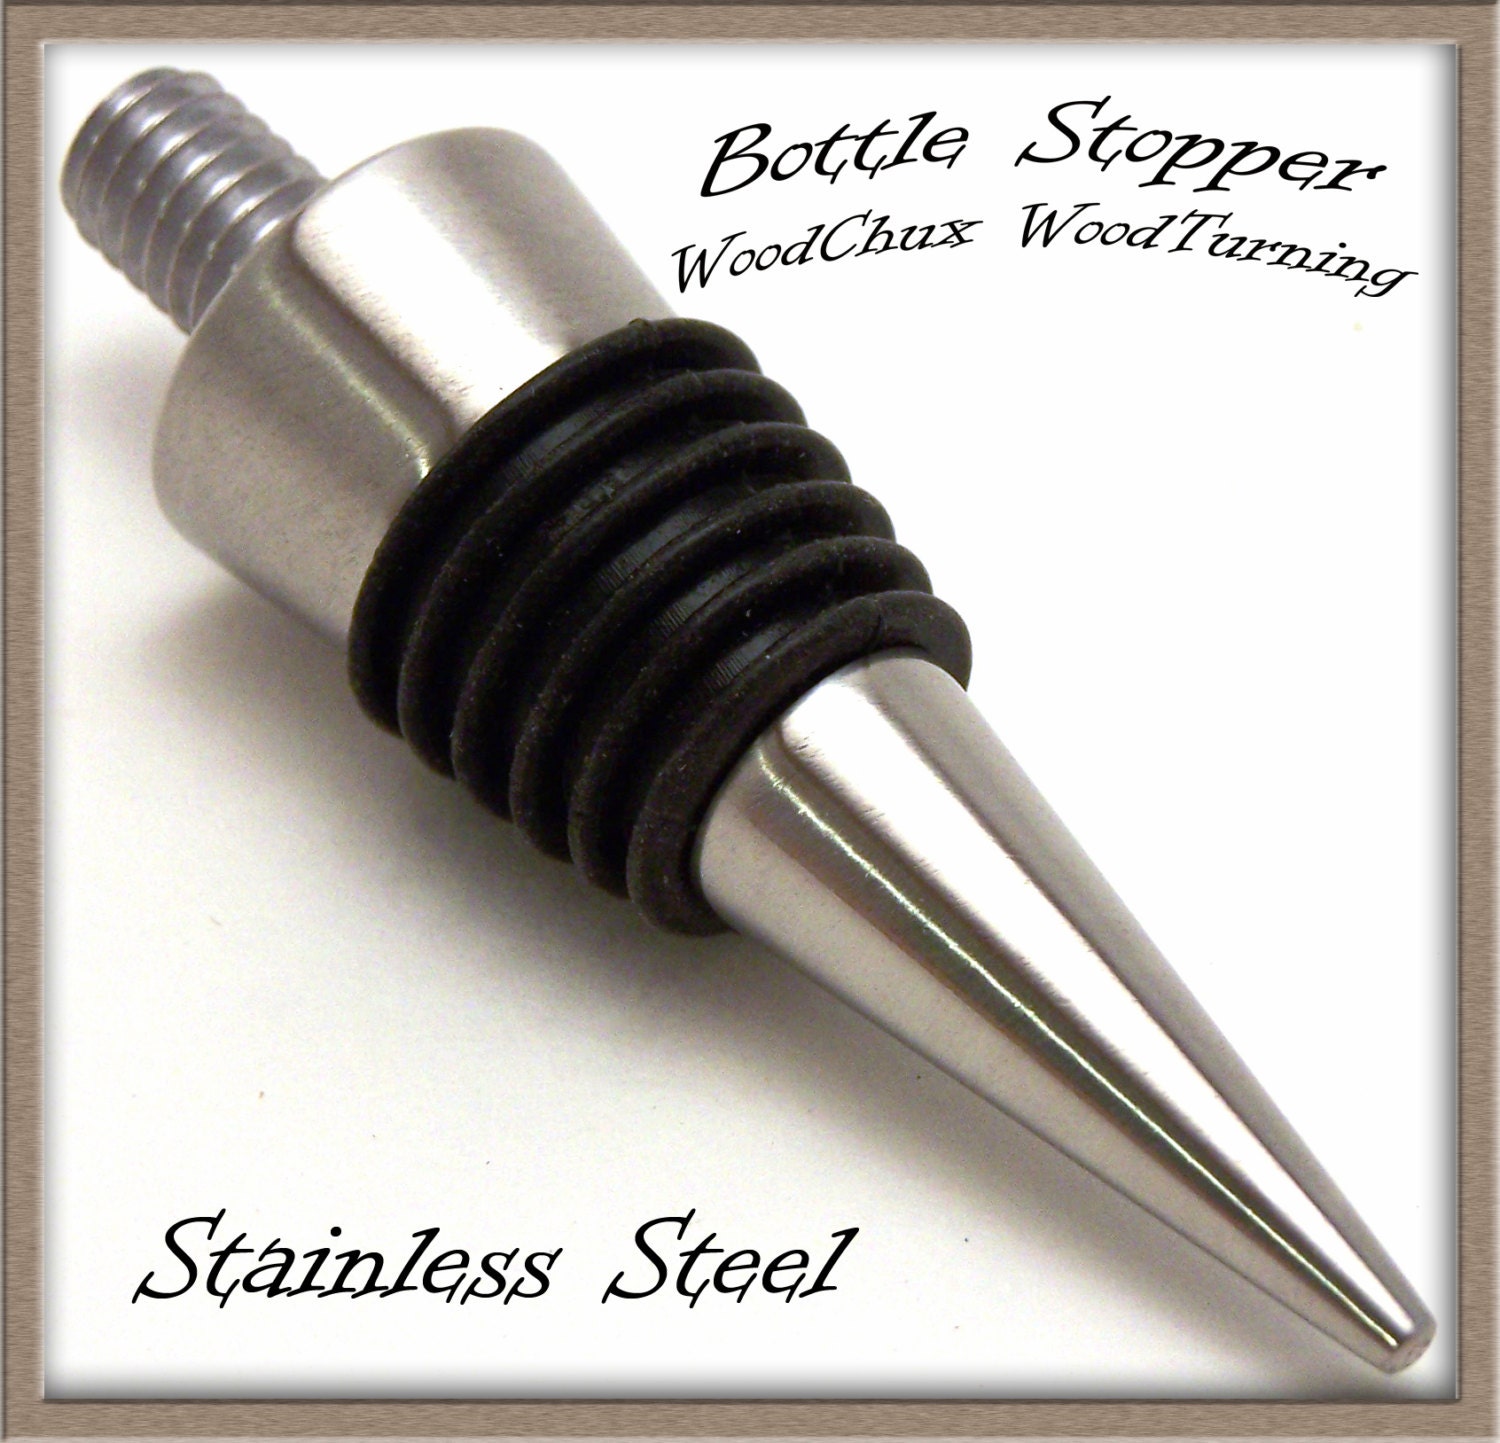 M8x1.25 Classic Bottle Stopper wood turning projet kits in Chrome